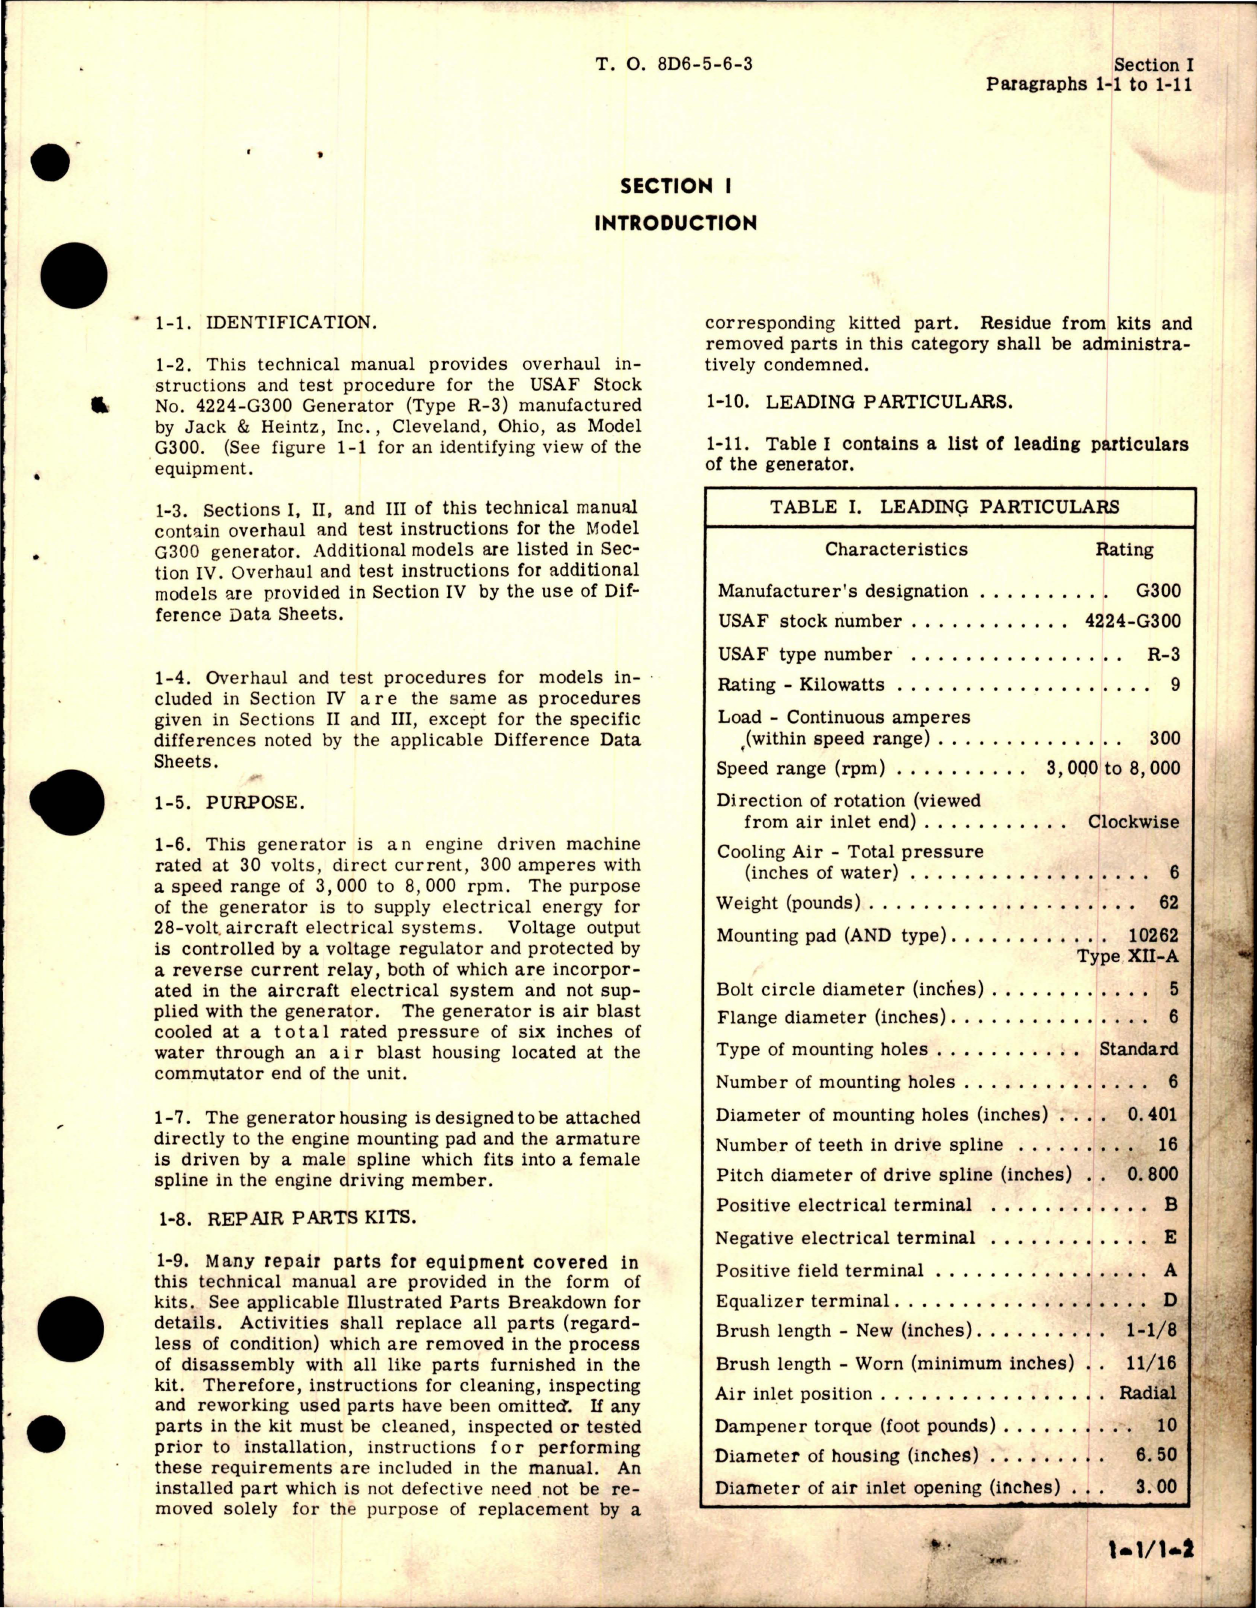 Sample page 7 from AirCorps Library document: Overhaul Manual for Generator - Model G300 Series 